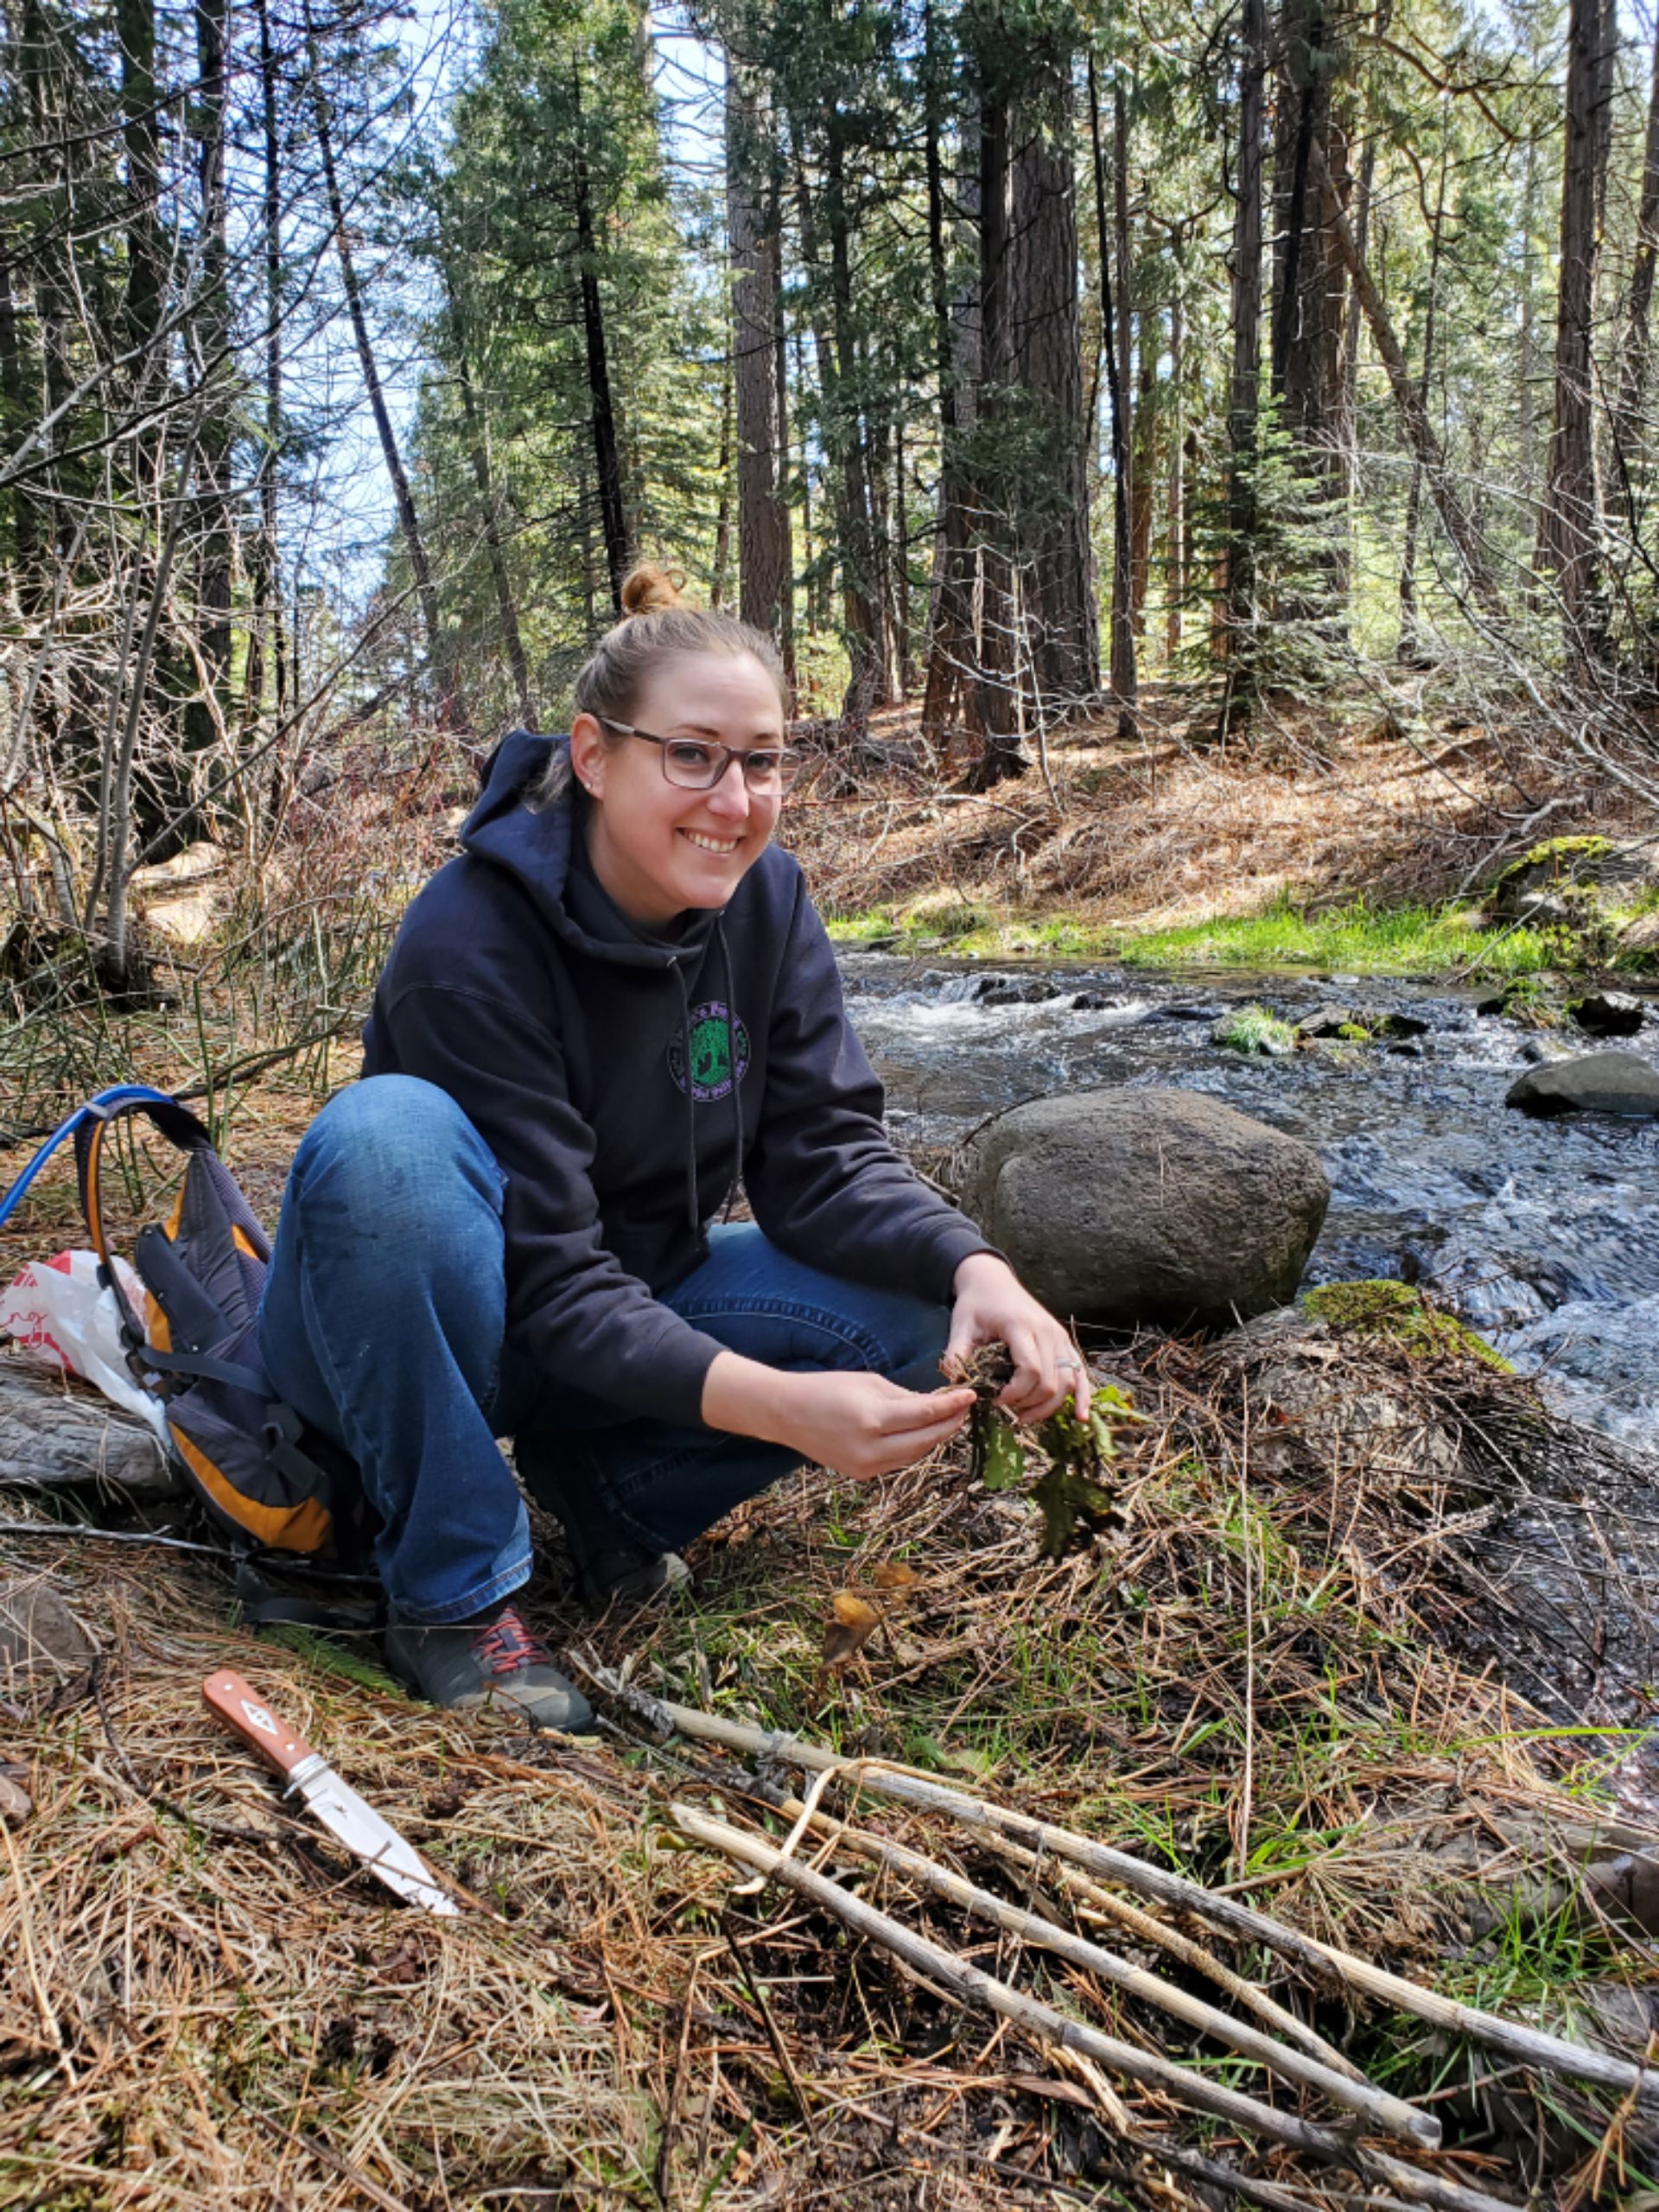 Image of Katy harvesting Avens Root next to a creek